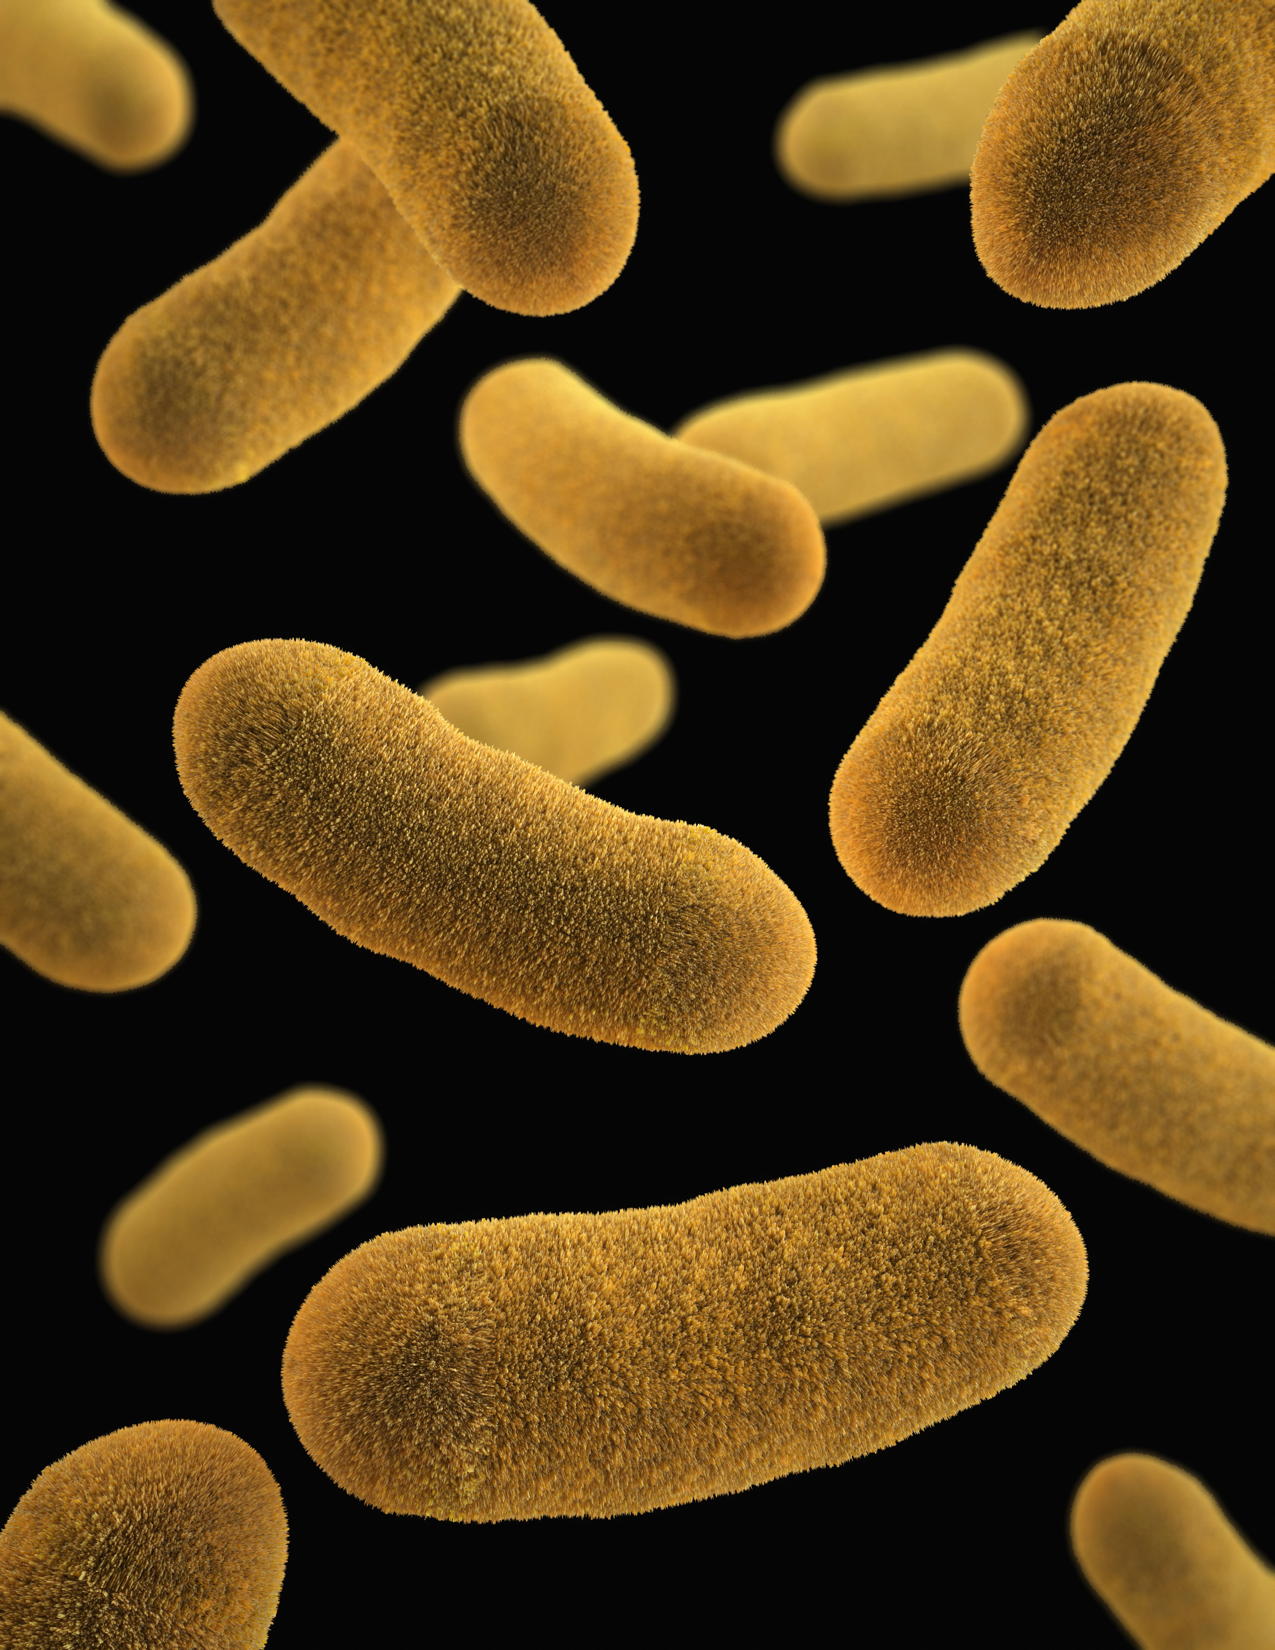 yellow long oval shaped organisms on a black background